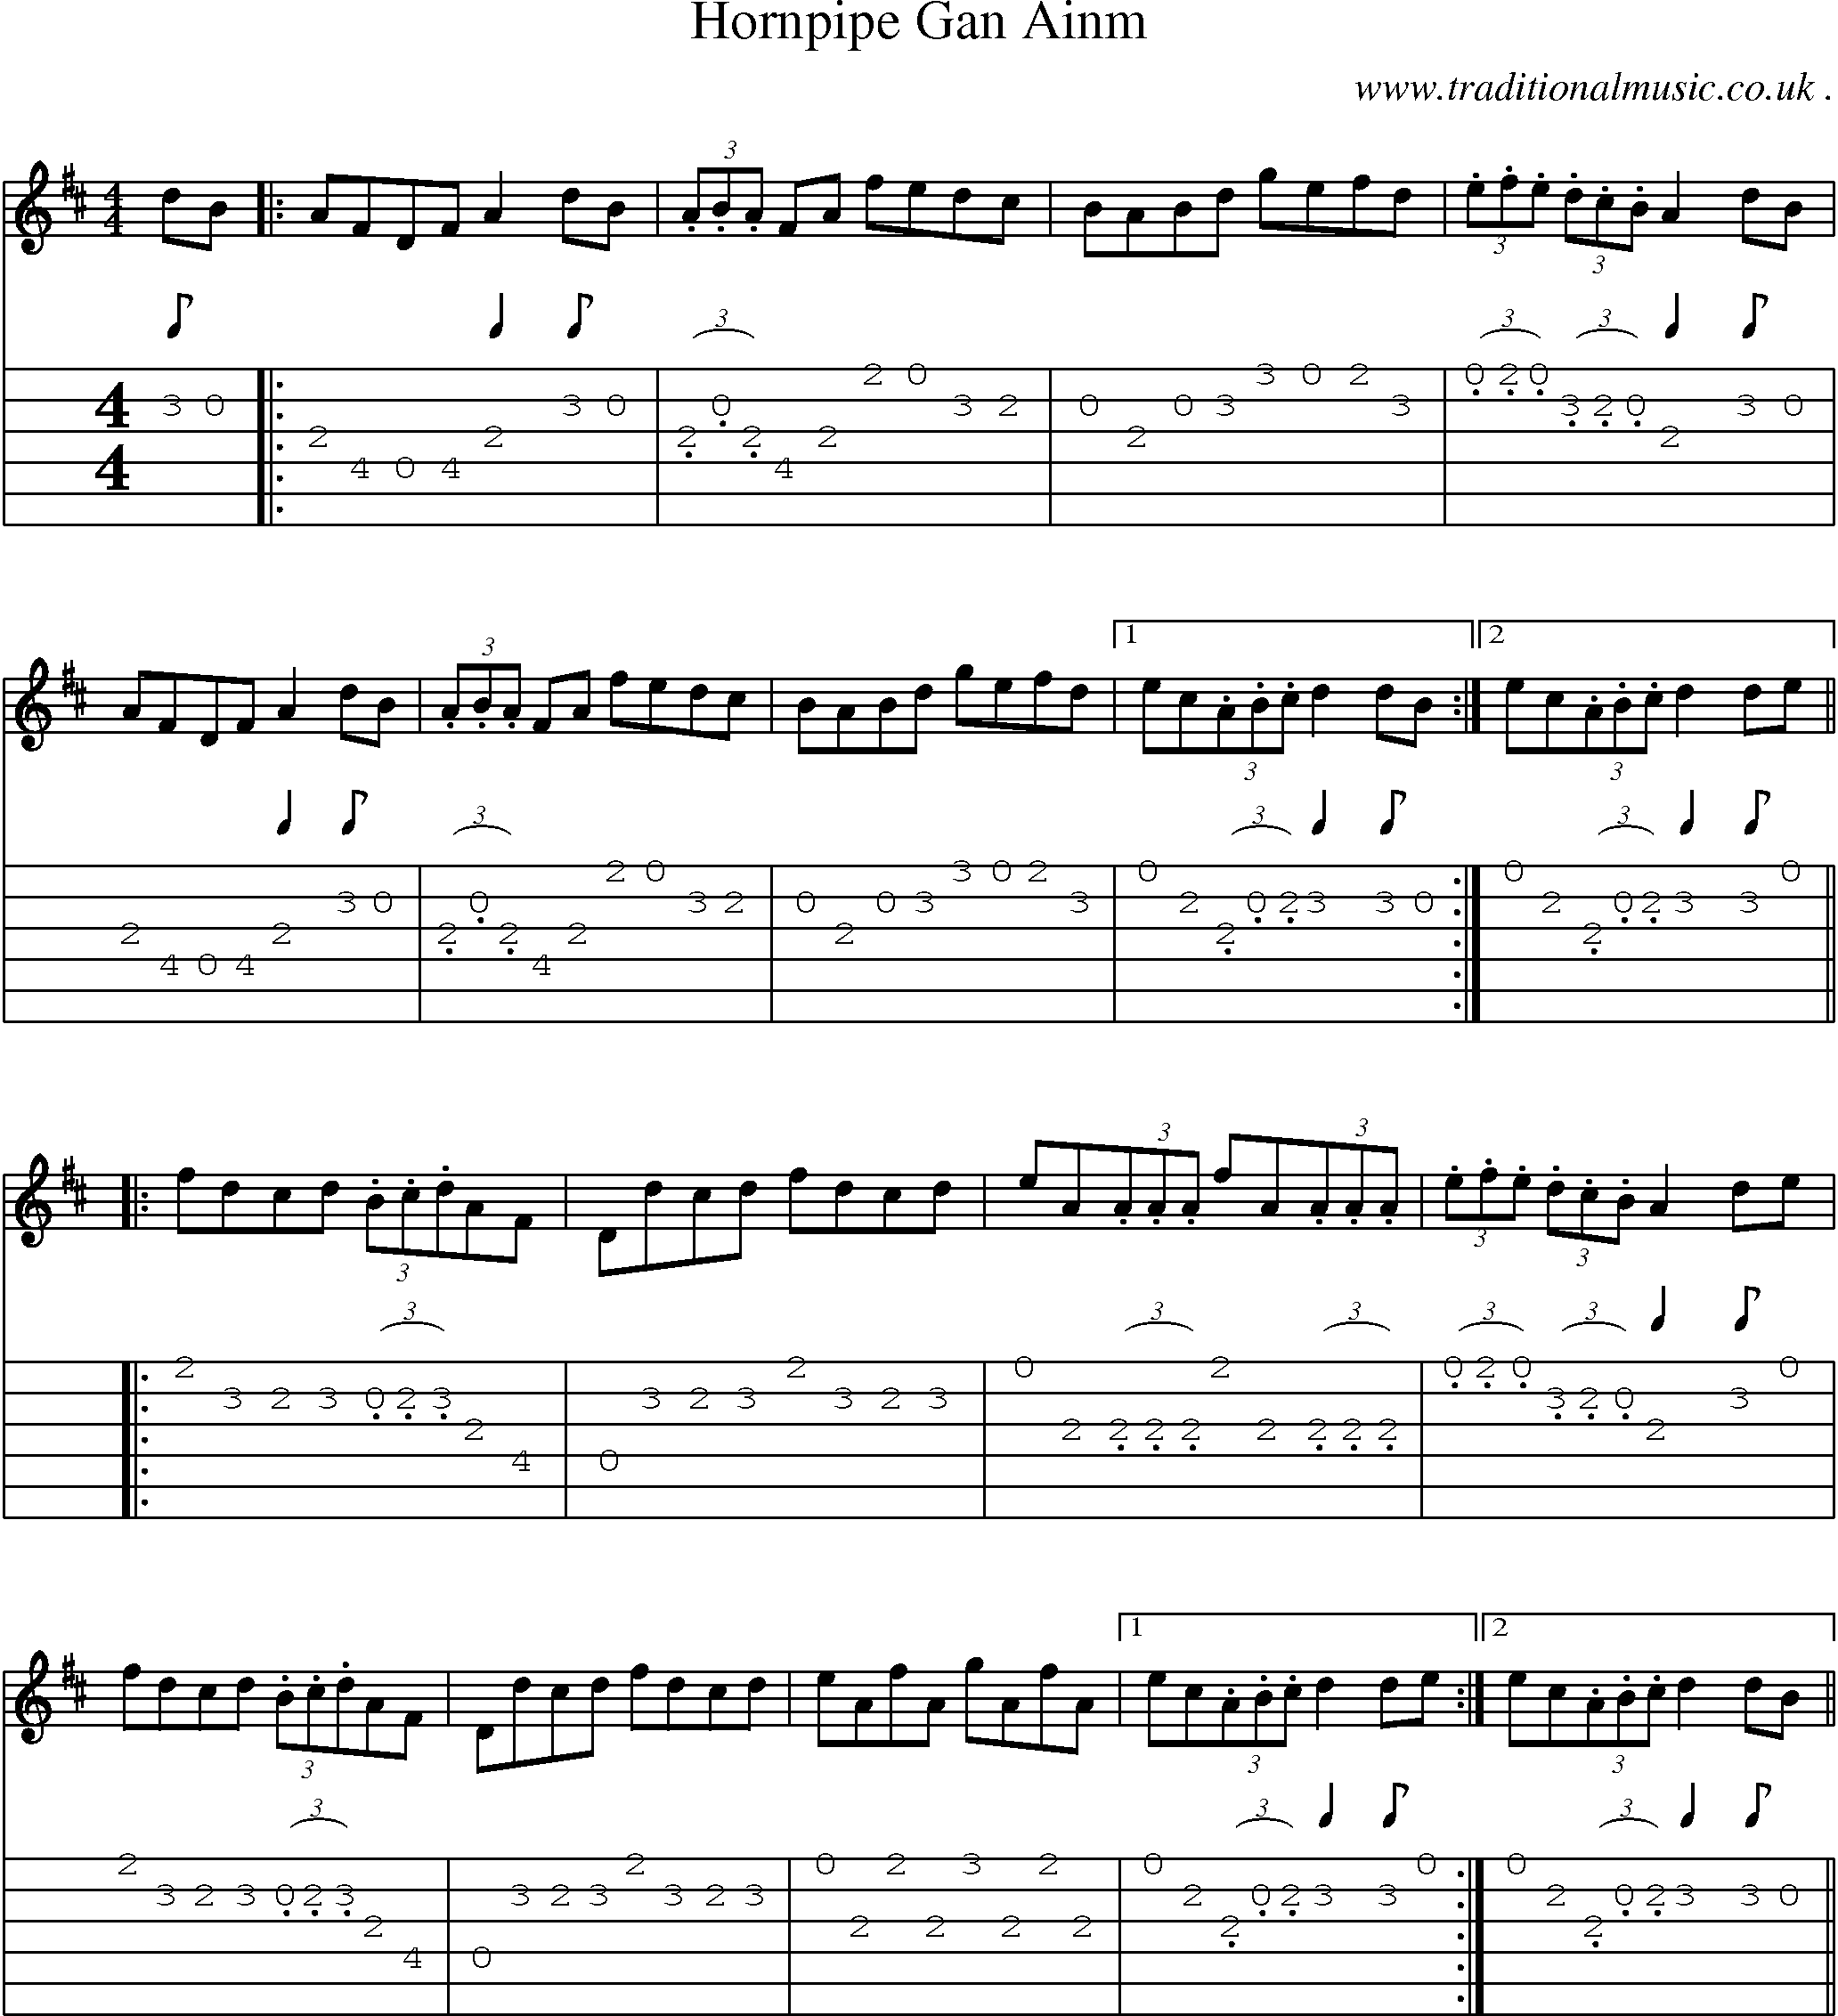 Sheet-Music and Guitar Tabs for Hornpipe Gan Ainm